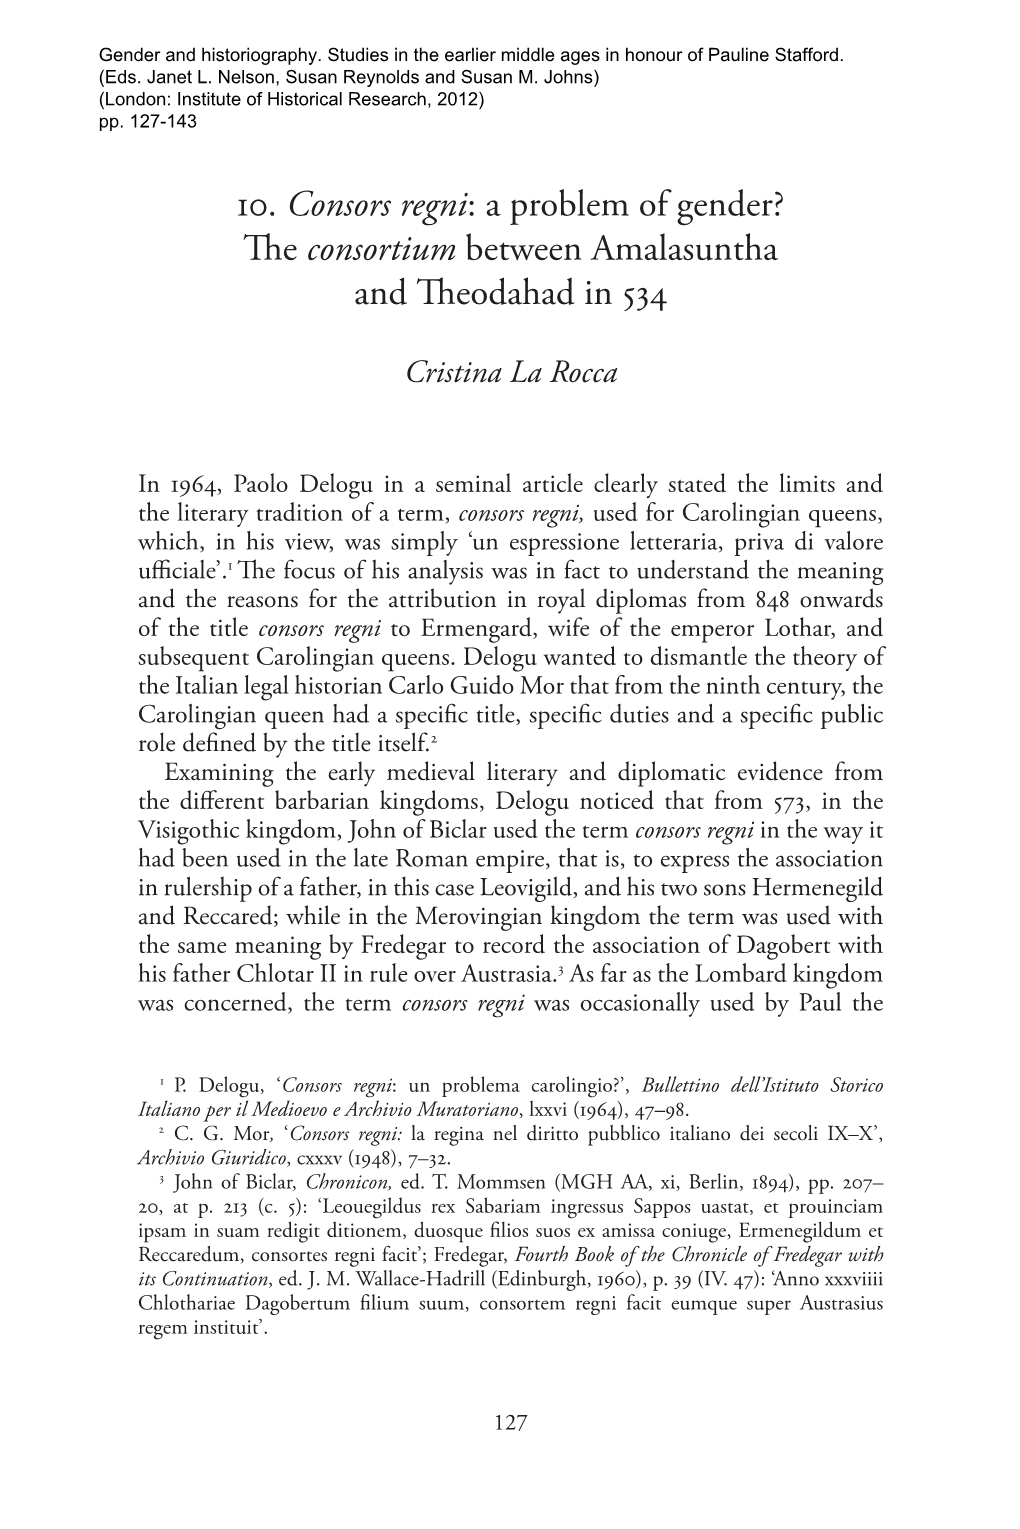 10. Consors Regni: a Problem of Gender? the Consortium Between Amalasuntha and Theodahad in 534